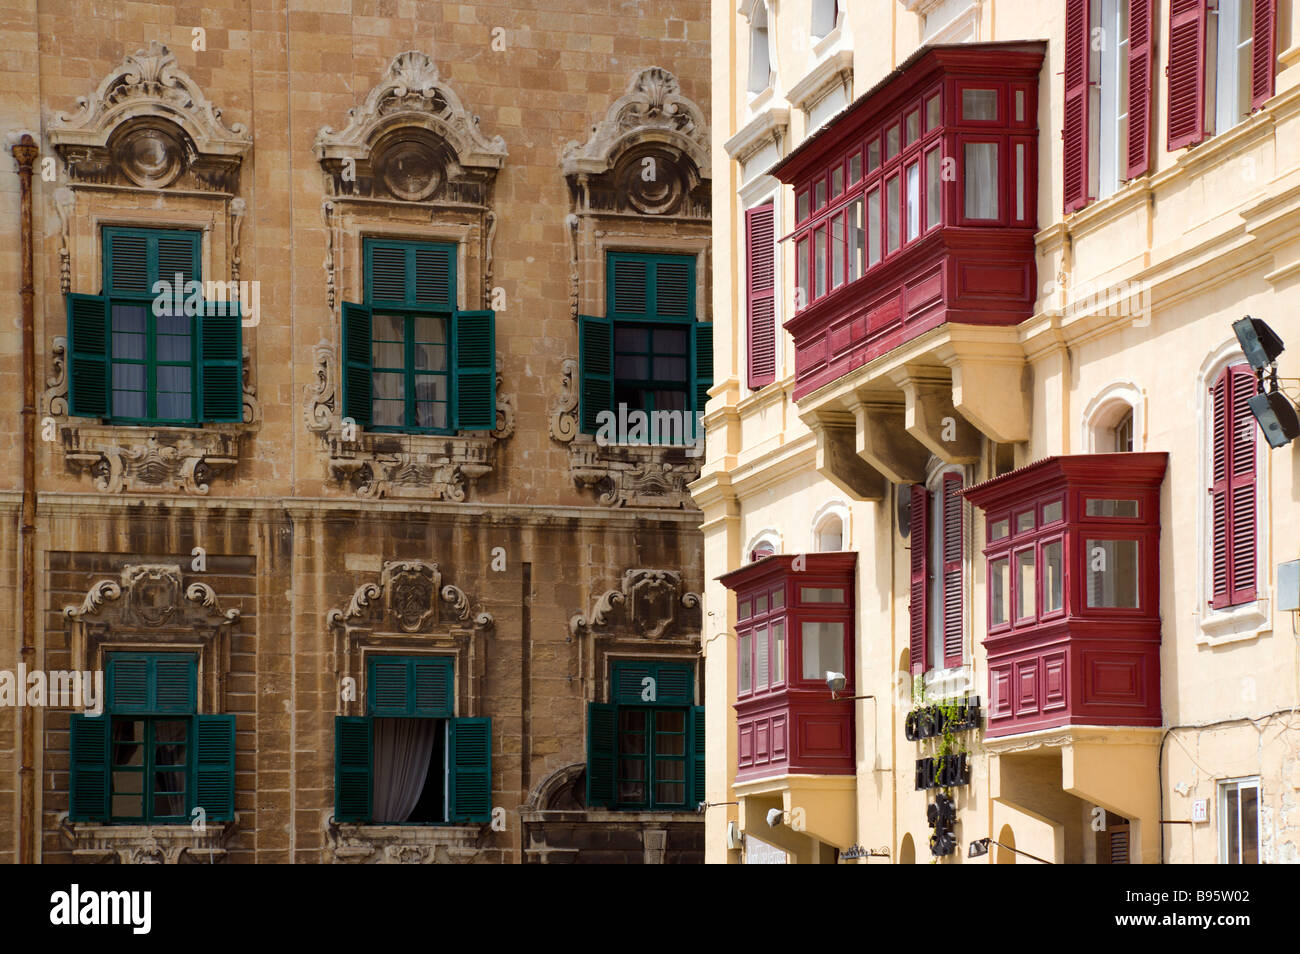 MALTA Valletta Auberge de Castille for knights of Langue of Castille, Leon and Portugal now Office of Prime Minister and Hotel Stock Photo